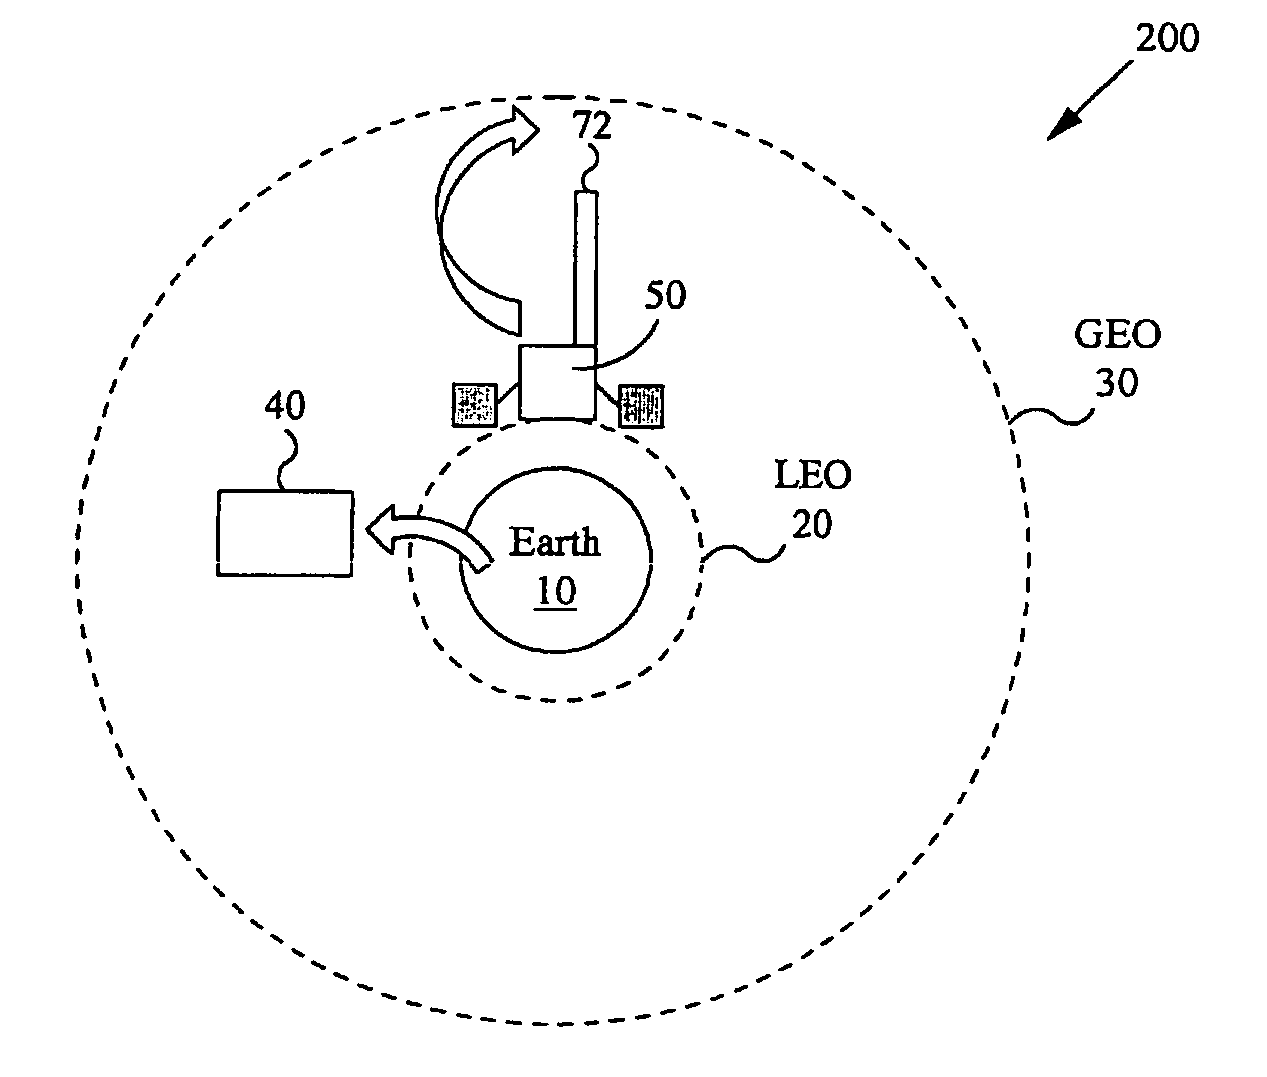 Architecture and method of constructing a Geosynchronous Earth Orbit platform using solar electric propulsion